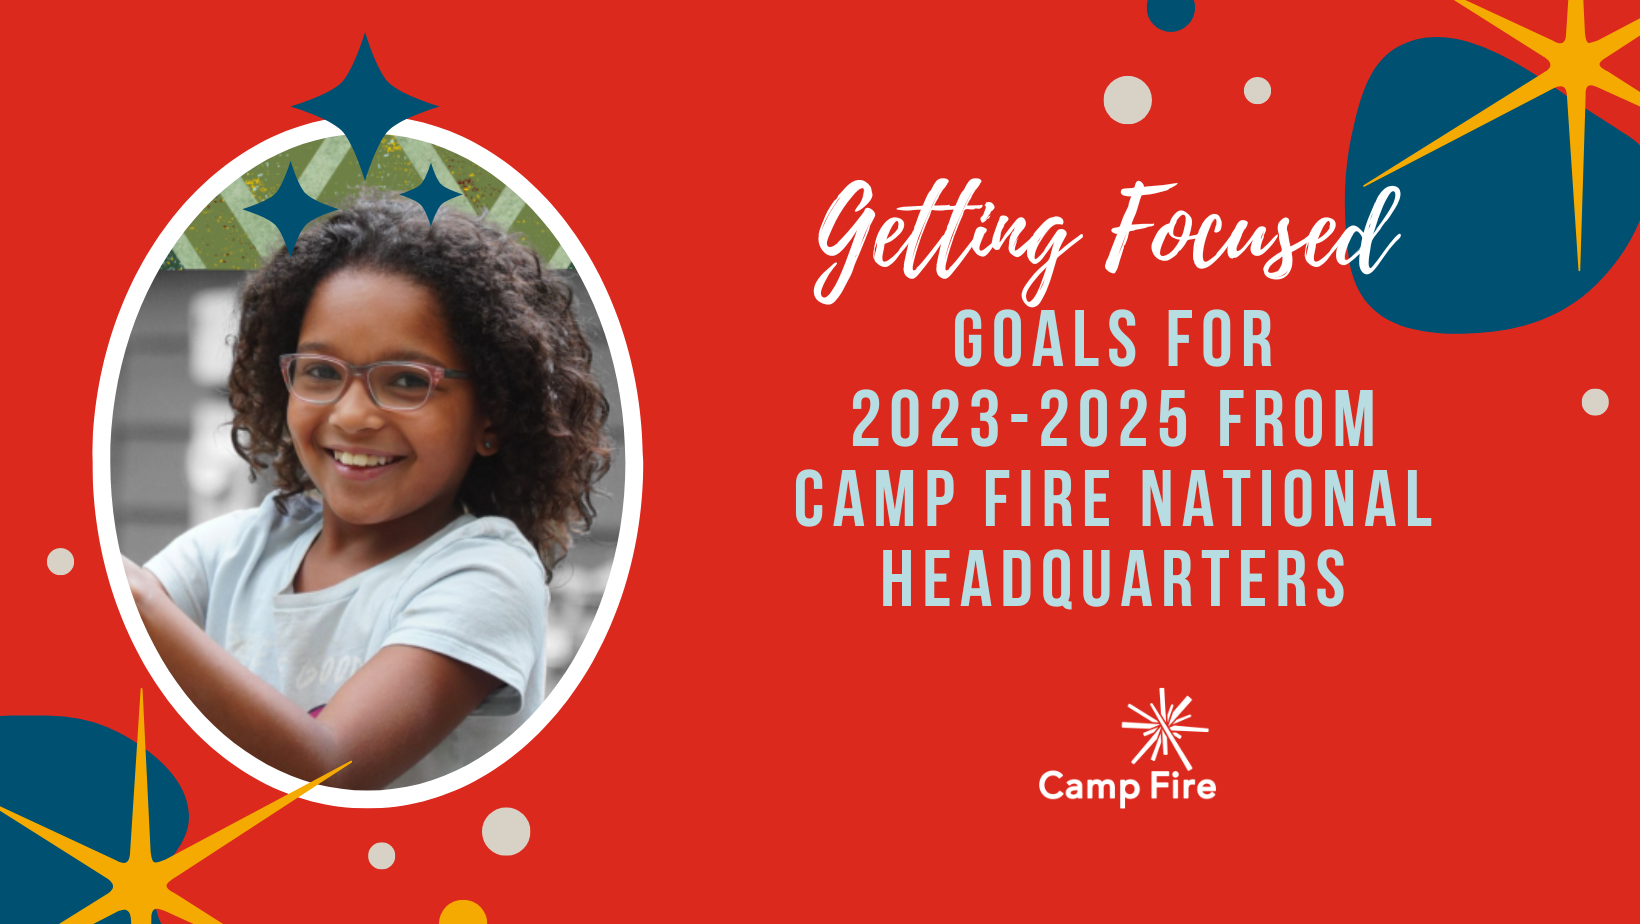 Getting Focused: Goals for 2023-2025 from Camp Fire National Headquarters, a Camp Fire blog